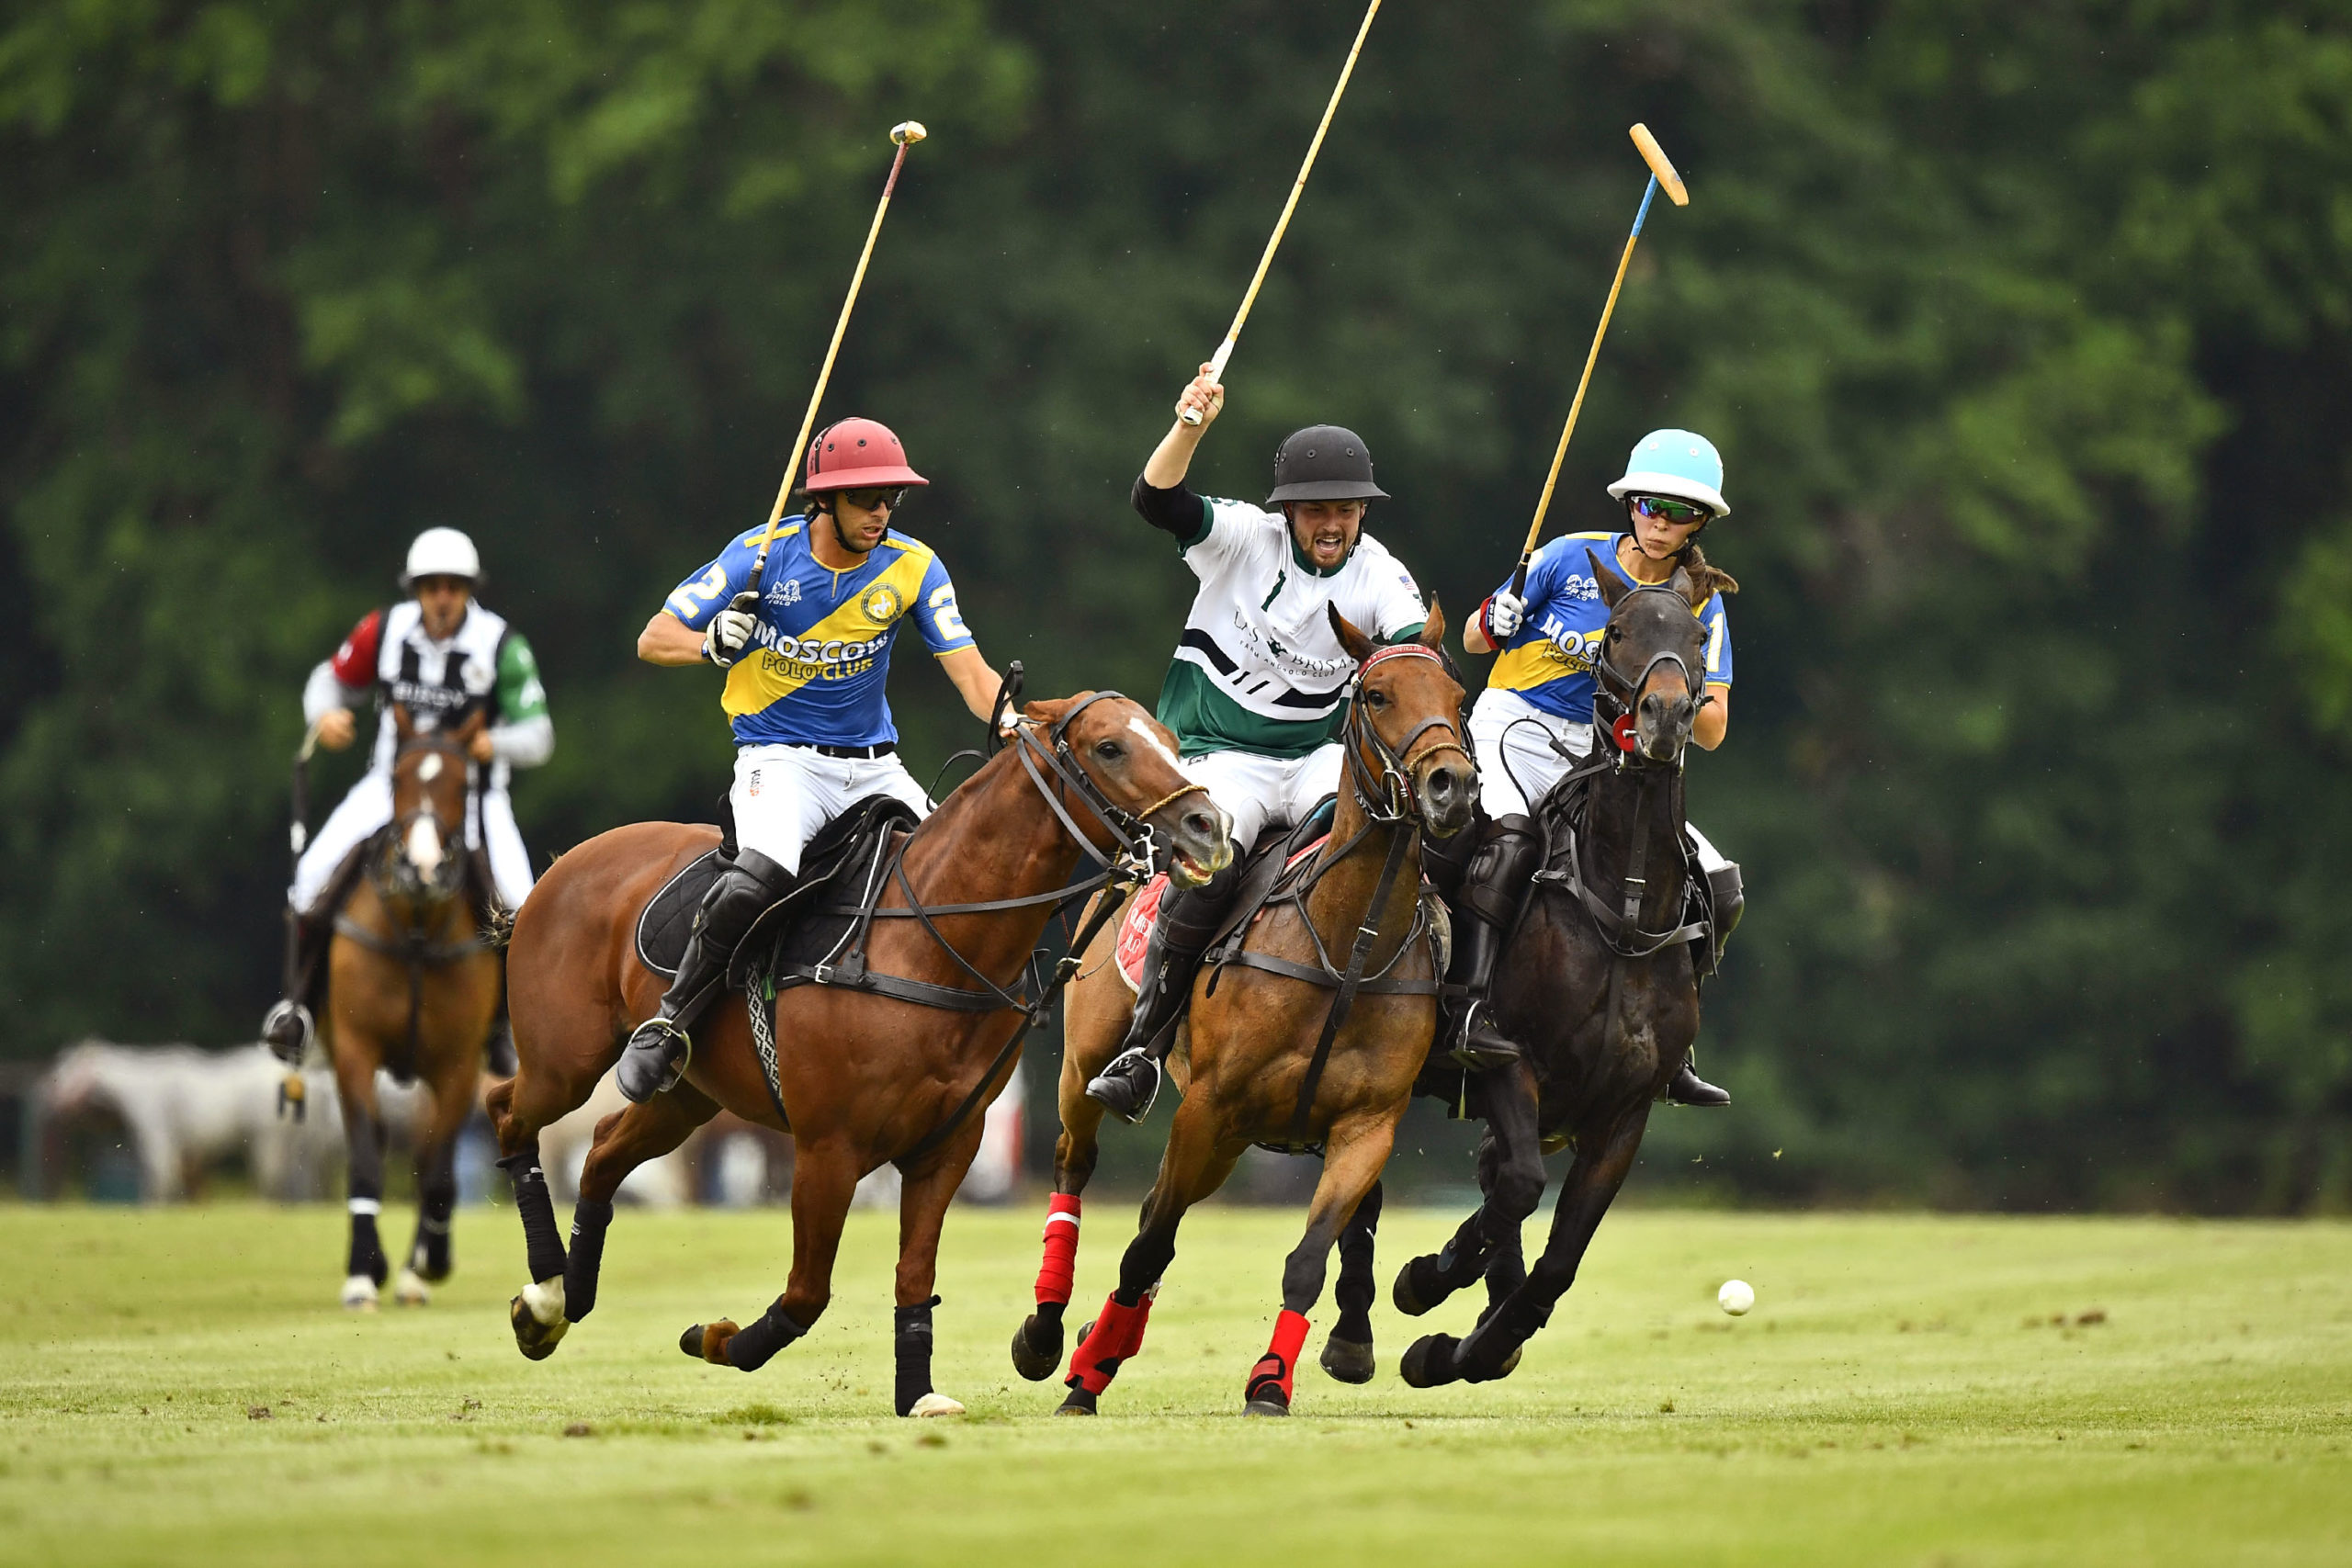 PoloLine.TV Highlights Polo Rider Cup Subsidiary Finals